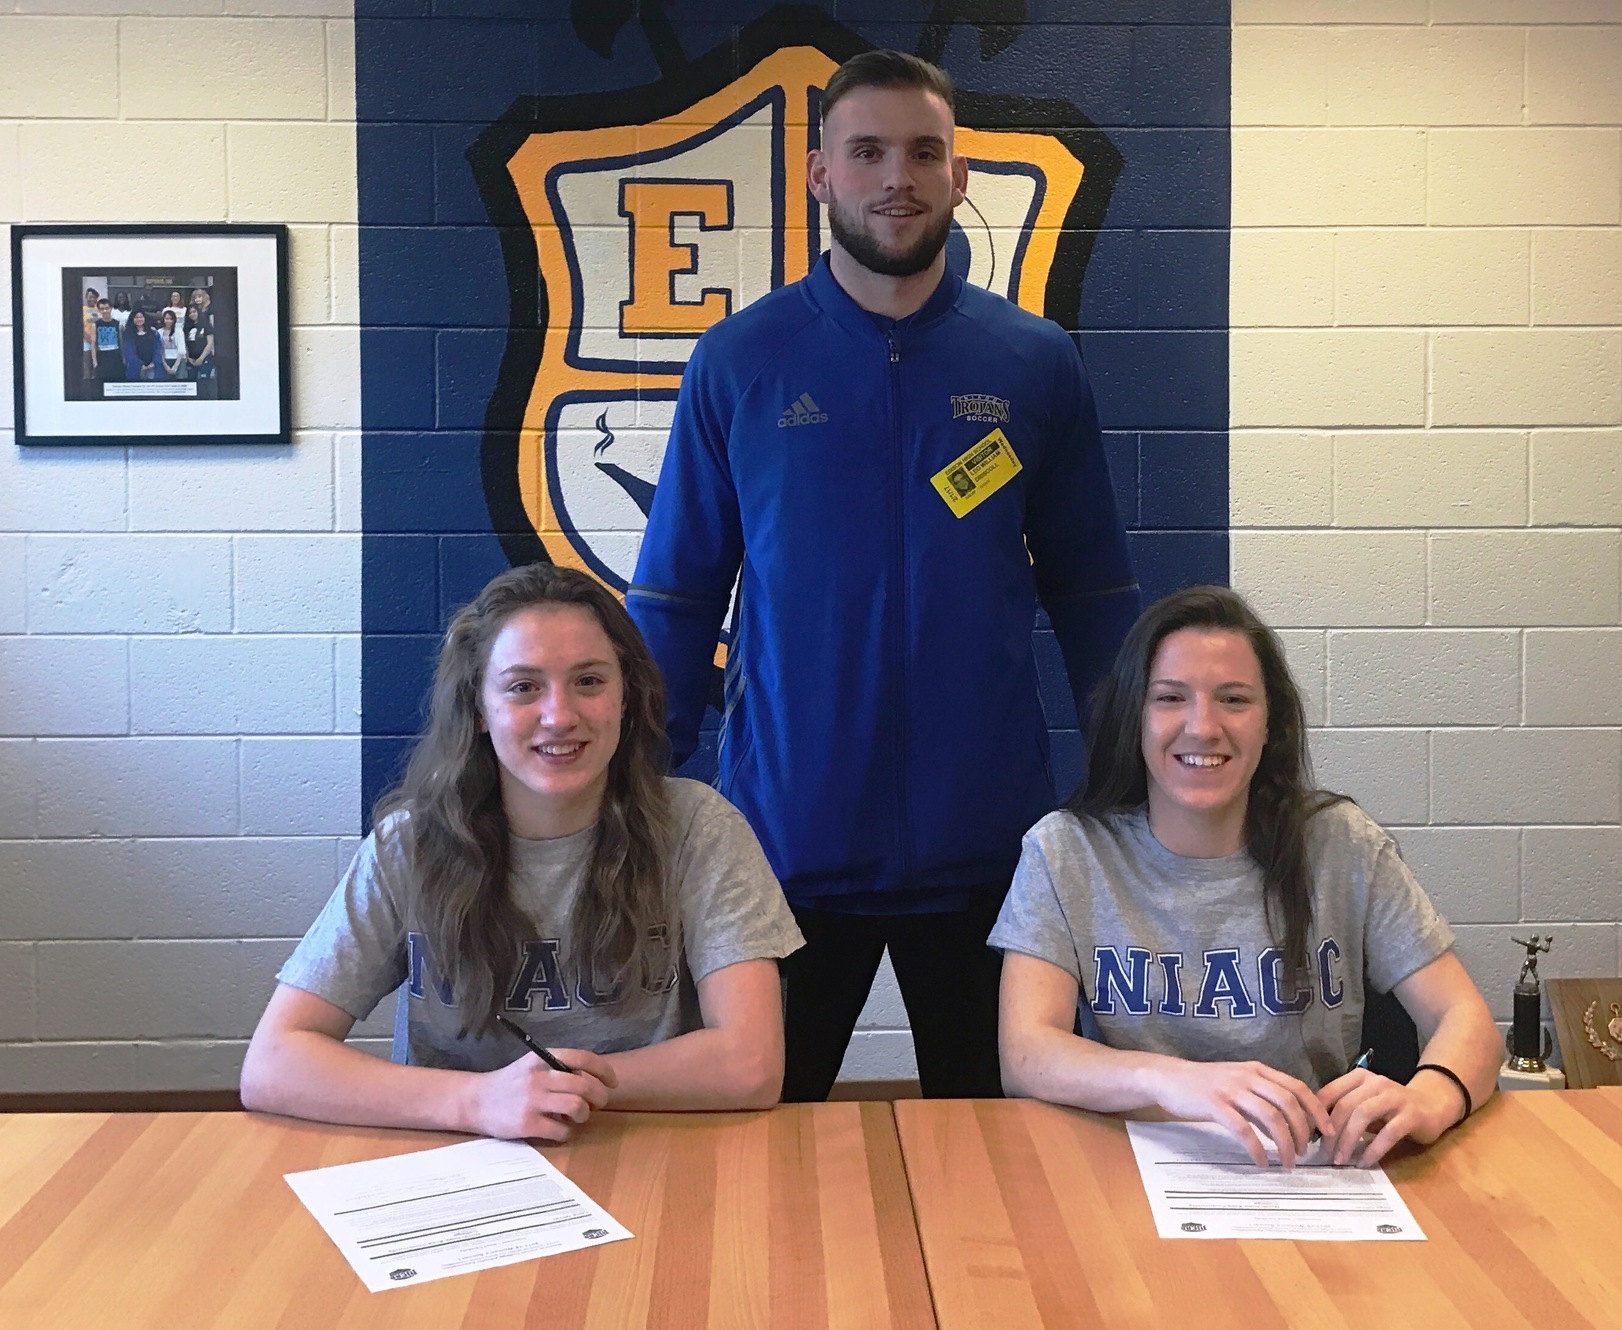 Lena Oliver (left) and Olga Oliver from Minneapolis recently signed a national letter of intent to play soccer at NIACC in the fall of 2017. NIACC coach pictured is Leo Driscoll.